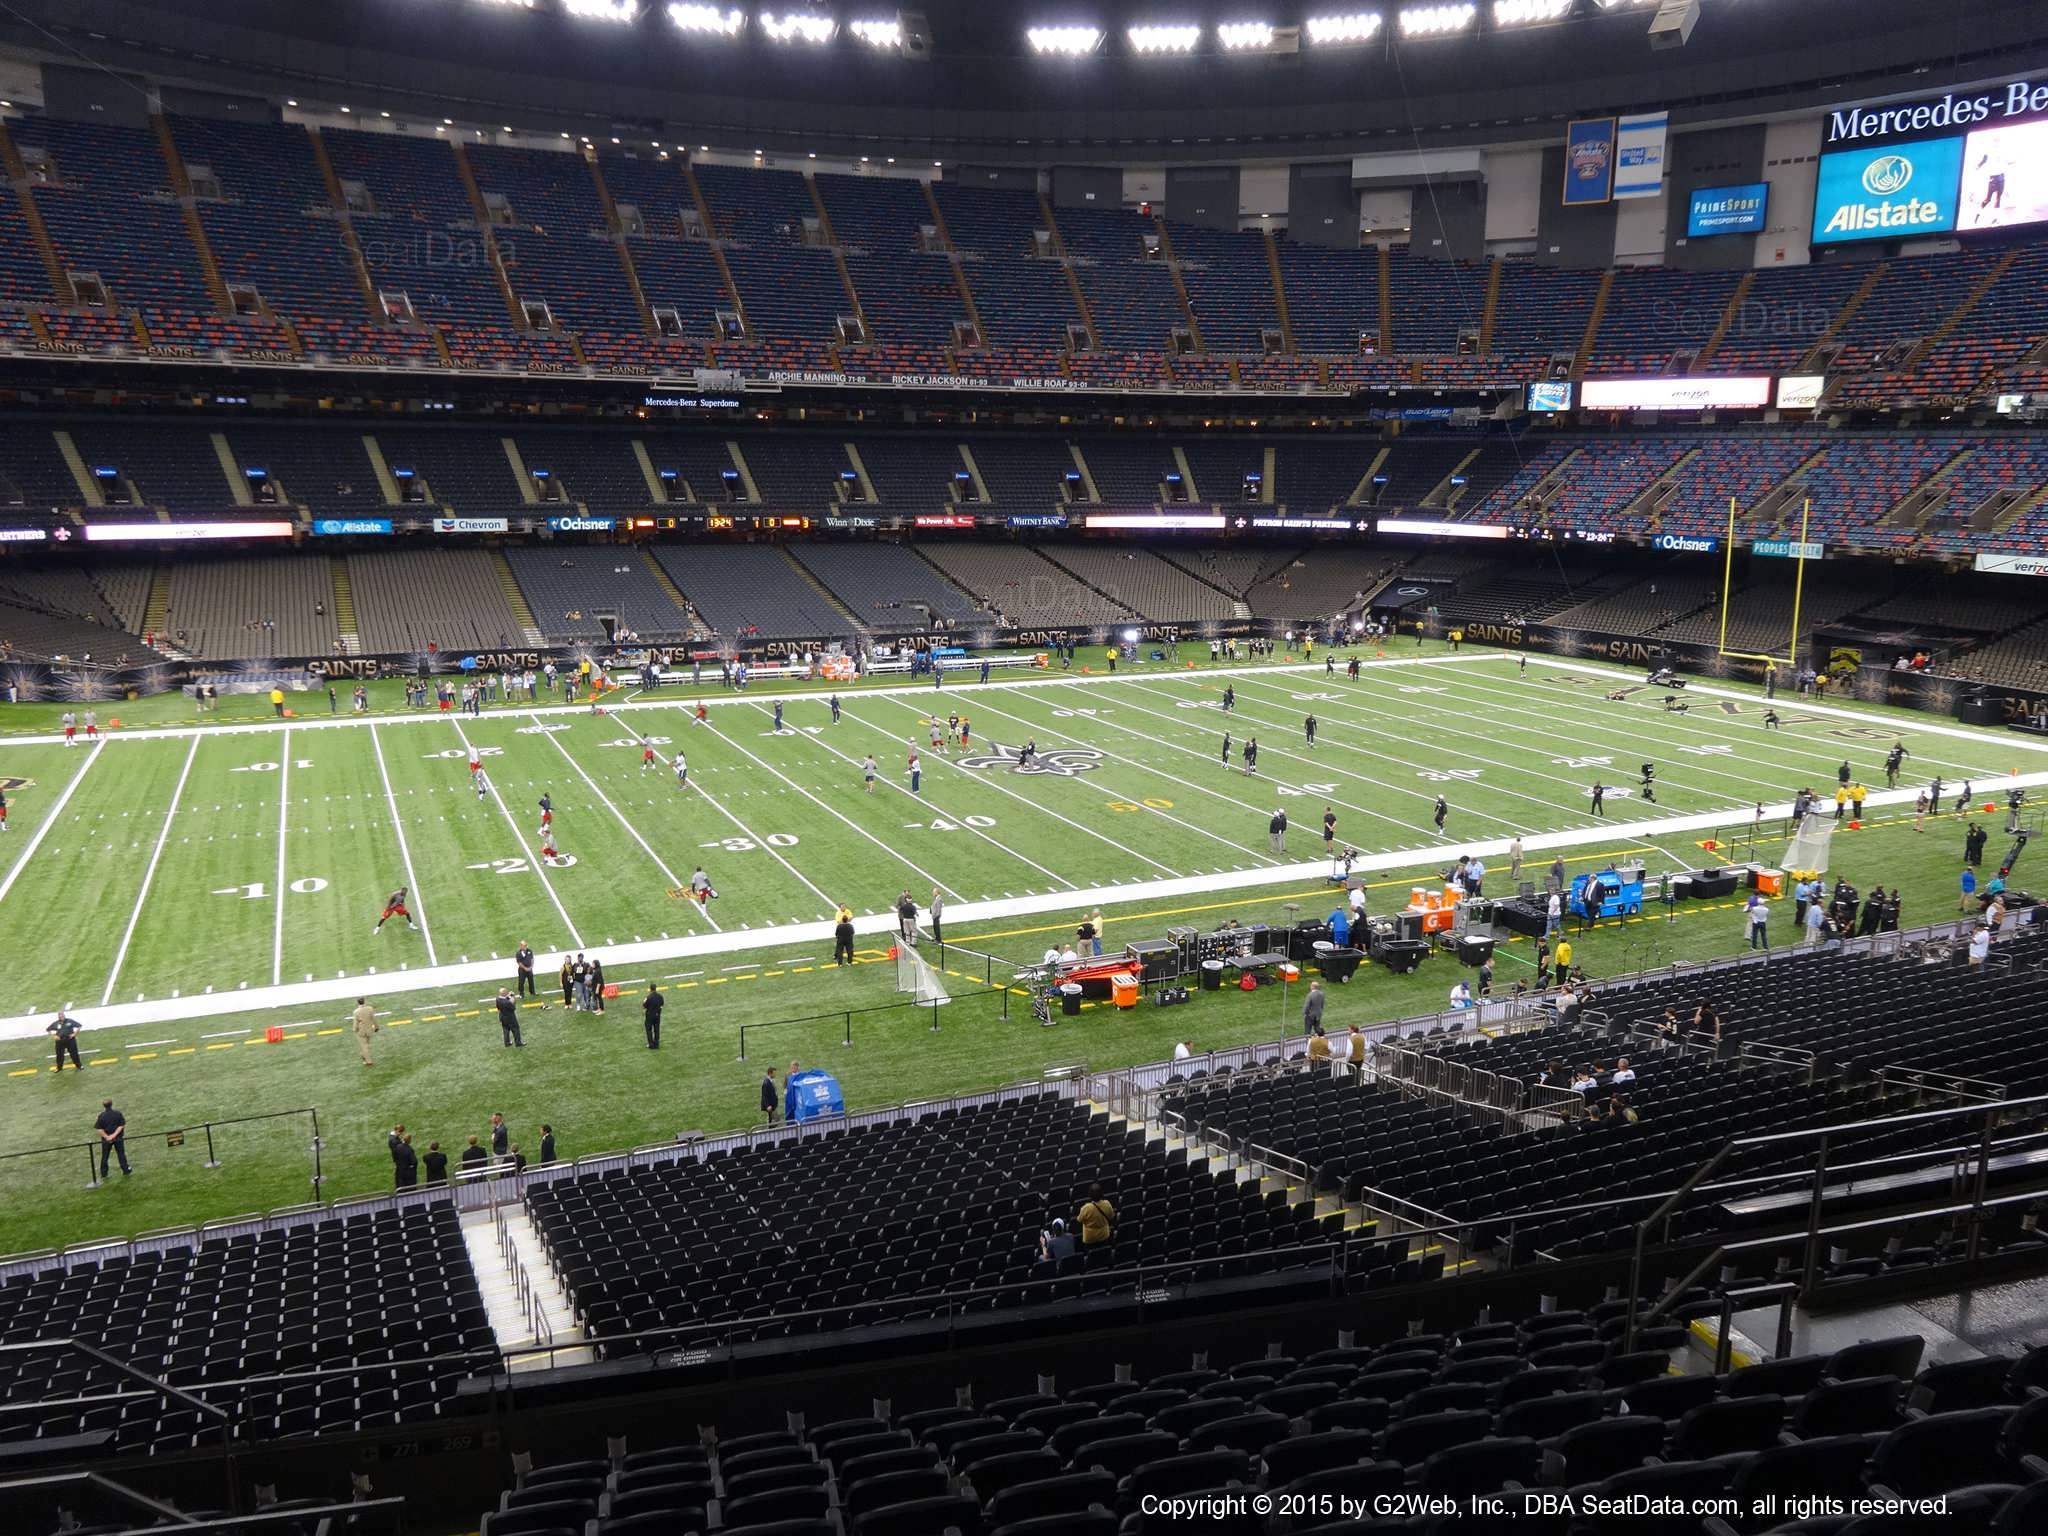 Seat view from section 339 at the Mercedes-Benz Superdome, home of the New Orleans Saints